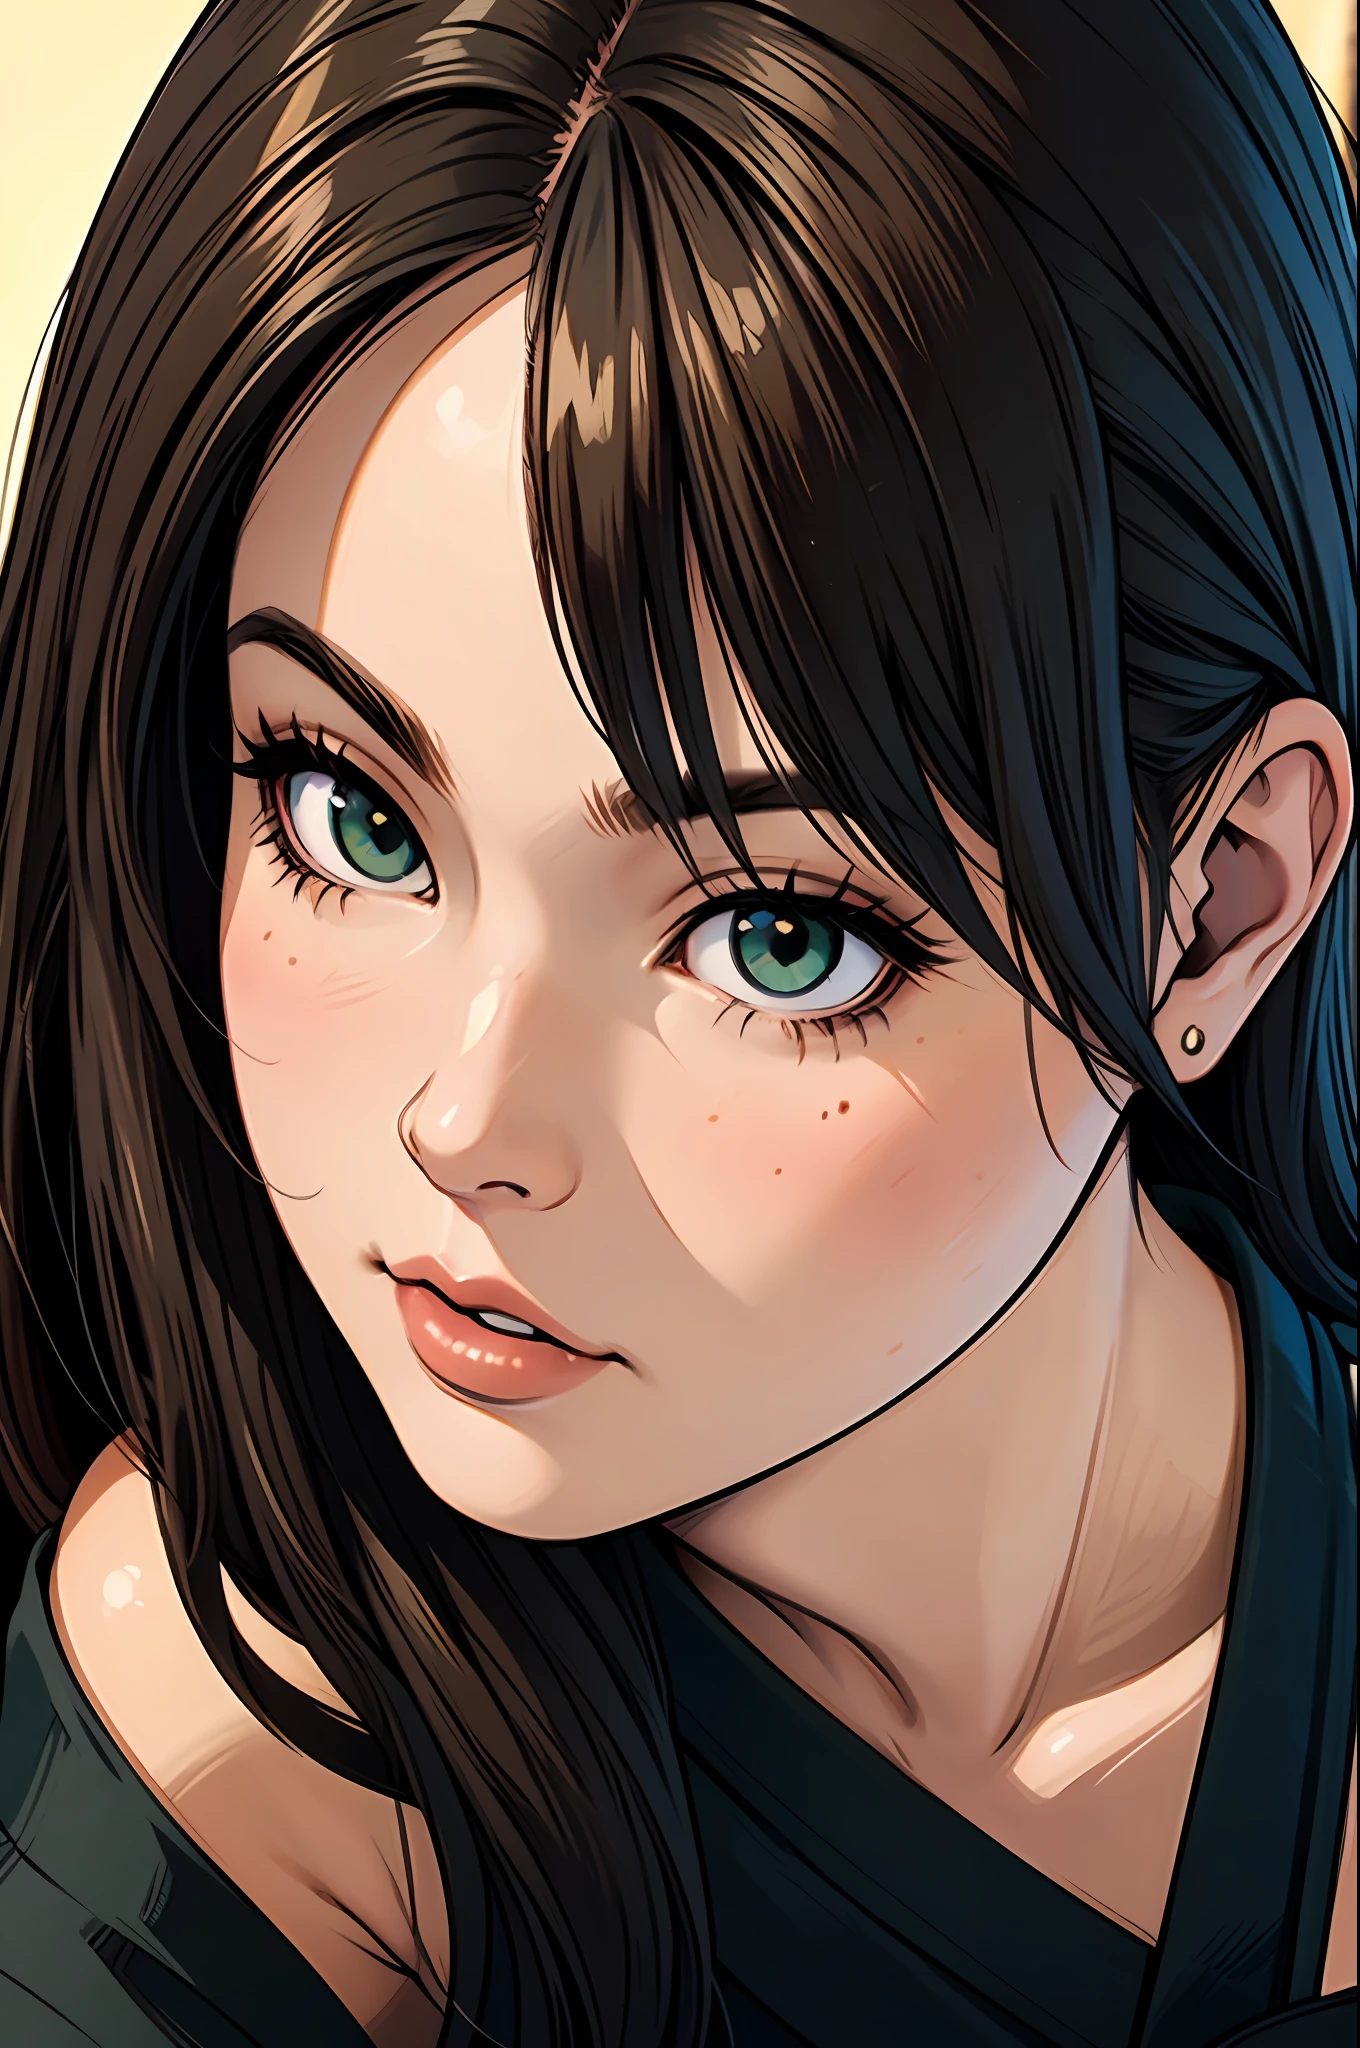 tetsuya nomura art style, (masterpiece), best quality, beautiful detailed hair detailed face, girl, solo, close-up portrait, narrow perspective, perfect feminine face, very stunning woman, simple black dress, chesnut brown hair, shoulder length hair, green eyes